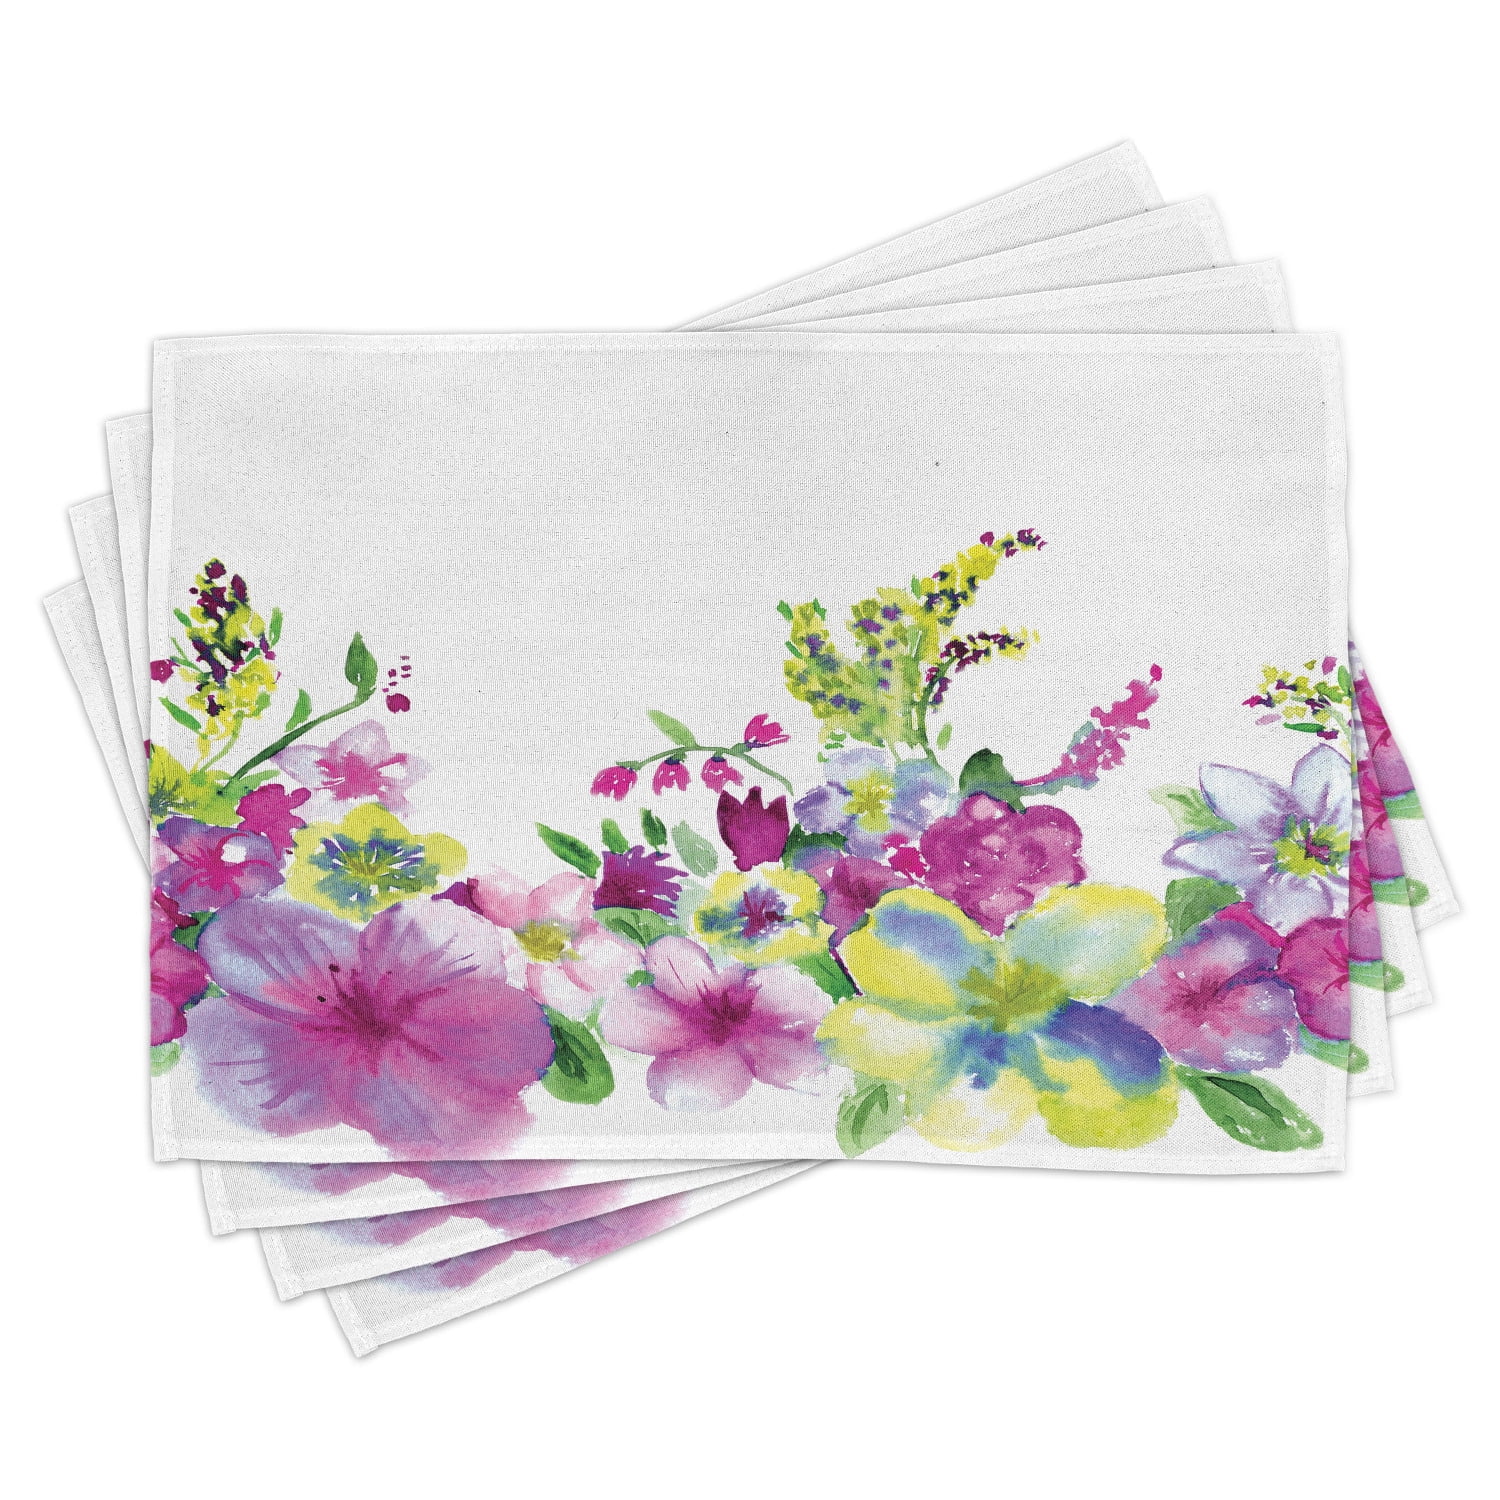 Lilac Purple Green Composition of Blossoming Flowers with Green Spring Leaves Romantic Nature Washable Fabric Placemats for Dining Room Kitchen Table Decor Ambesonne Floral Place Mats Set of 4